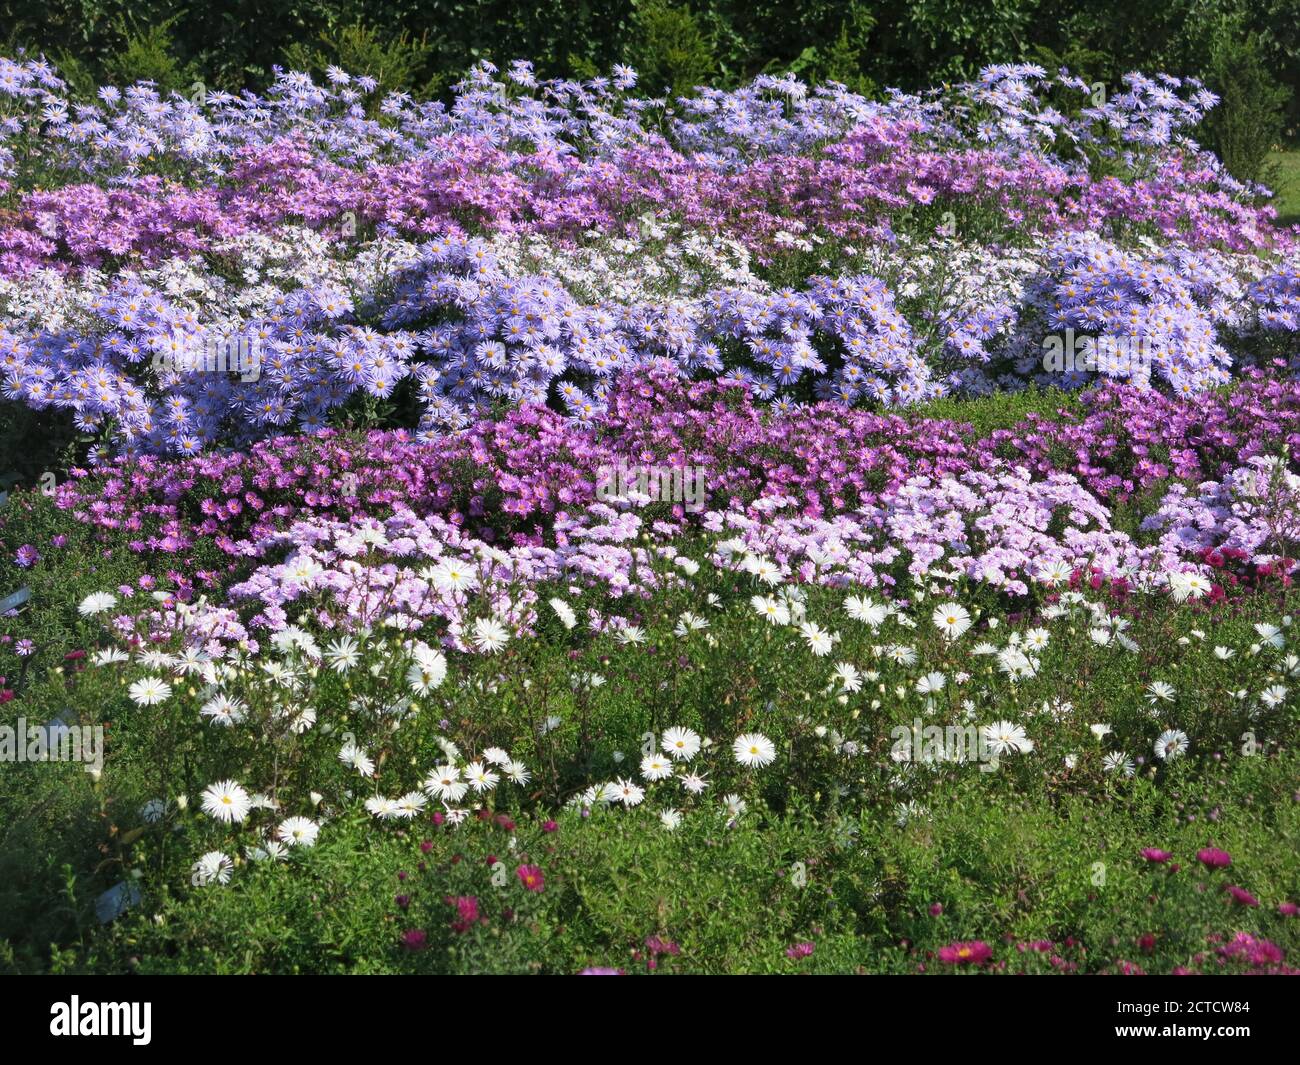 Rows of pink, white and blue Michaelmas Daisies, or asters, providing autumn colour for an English garden. Stock Photo